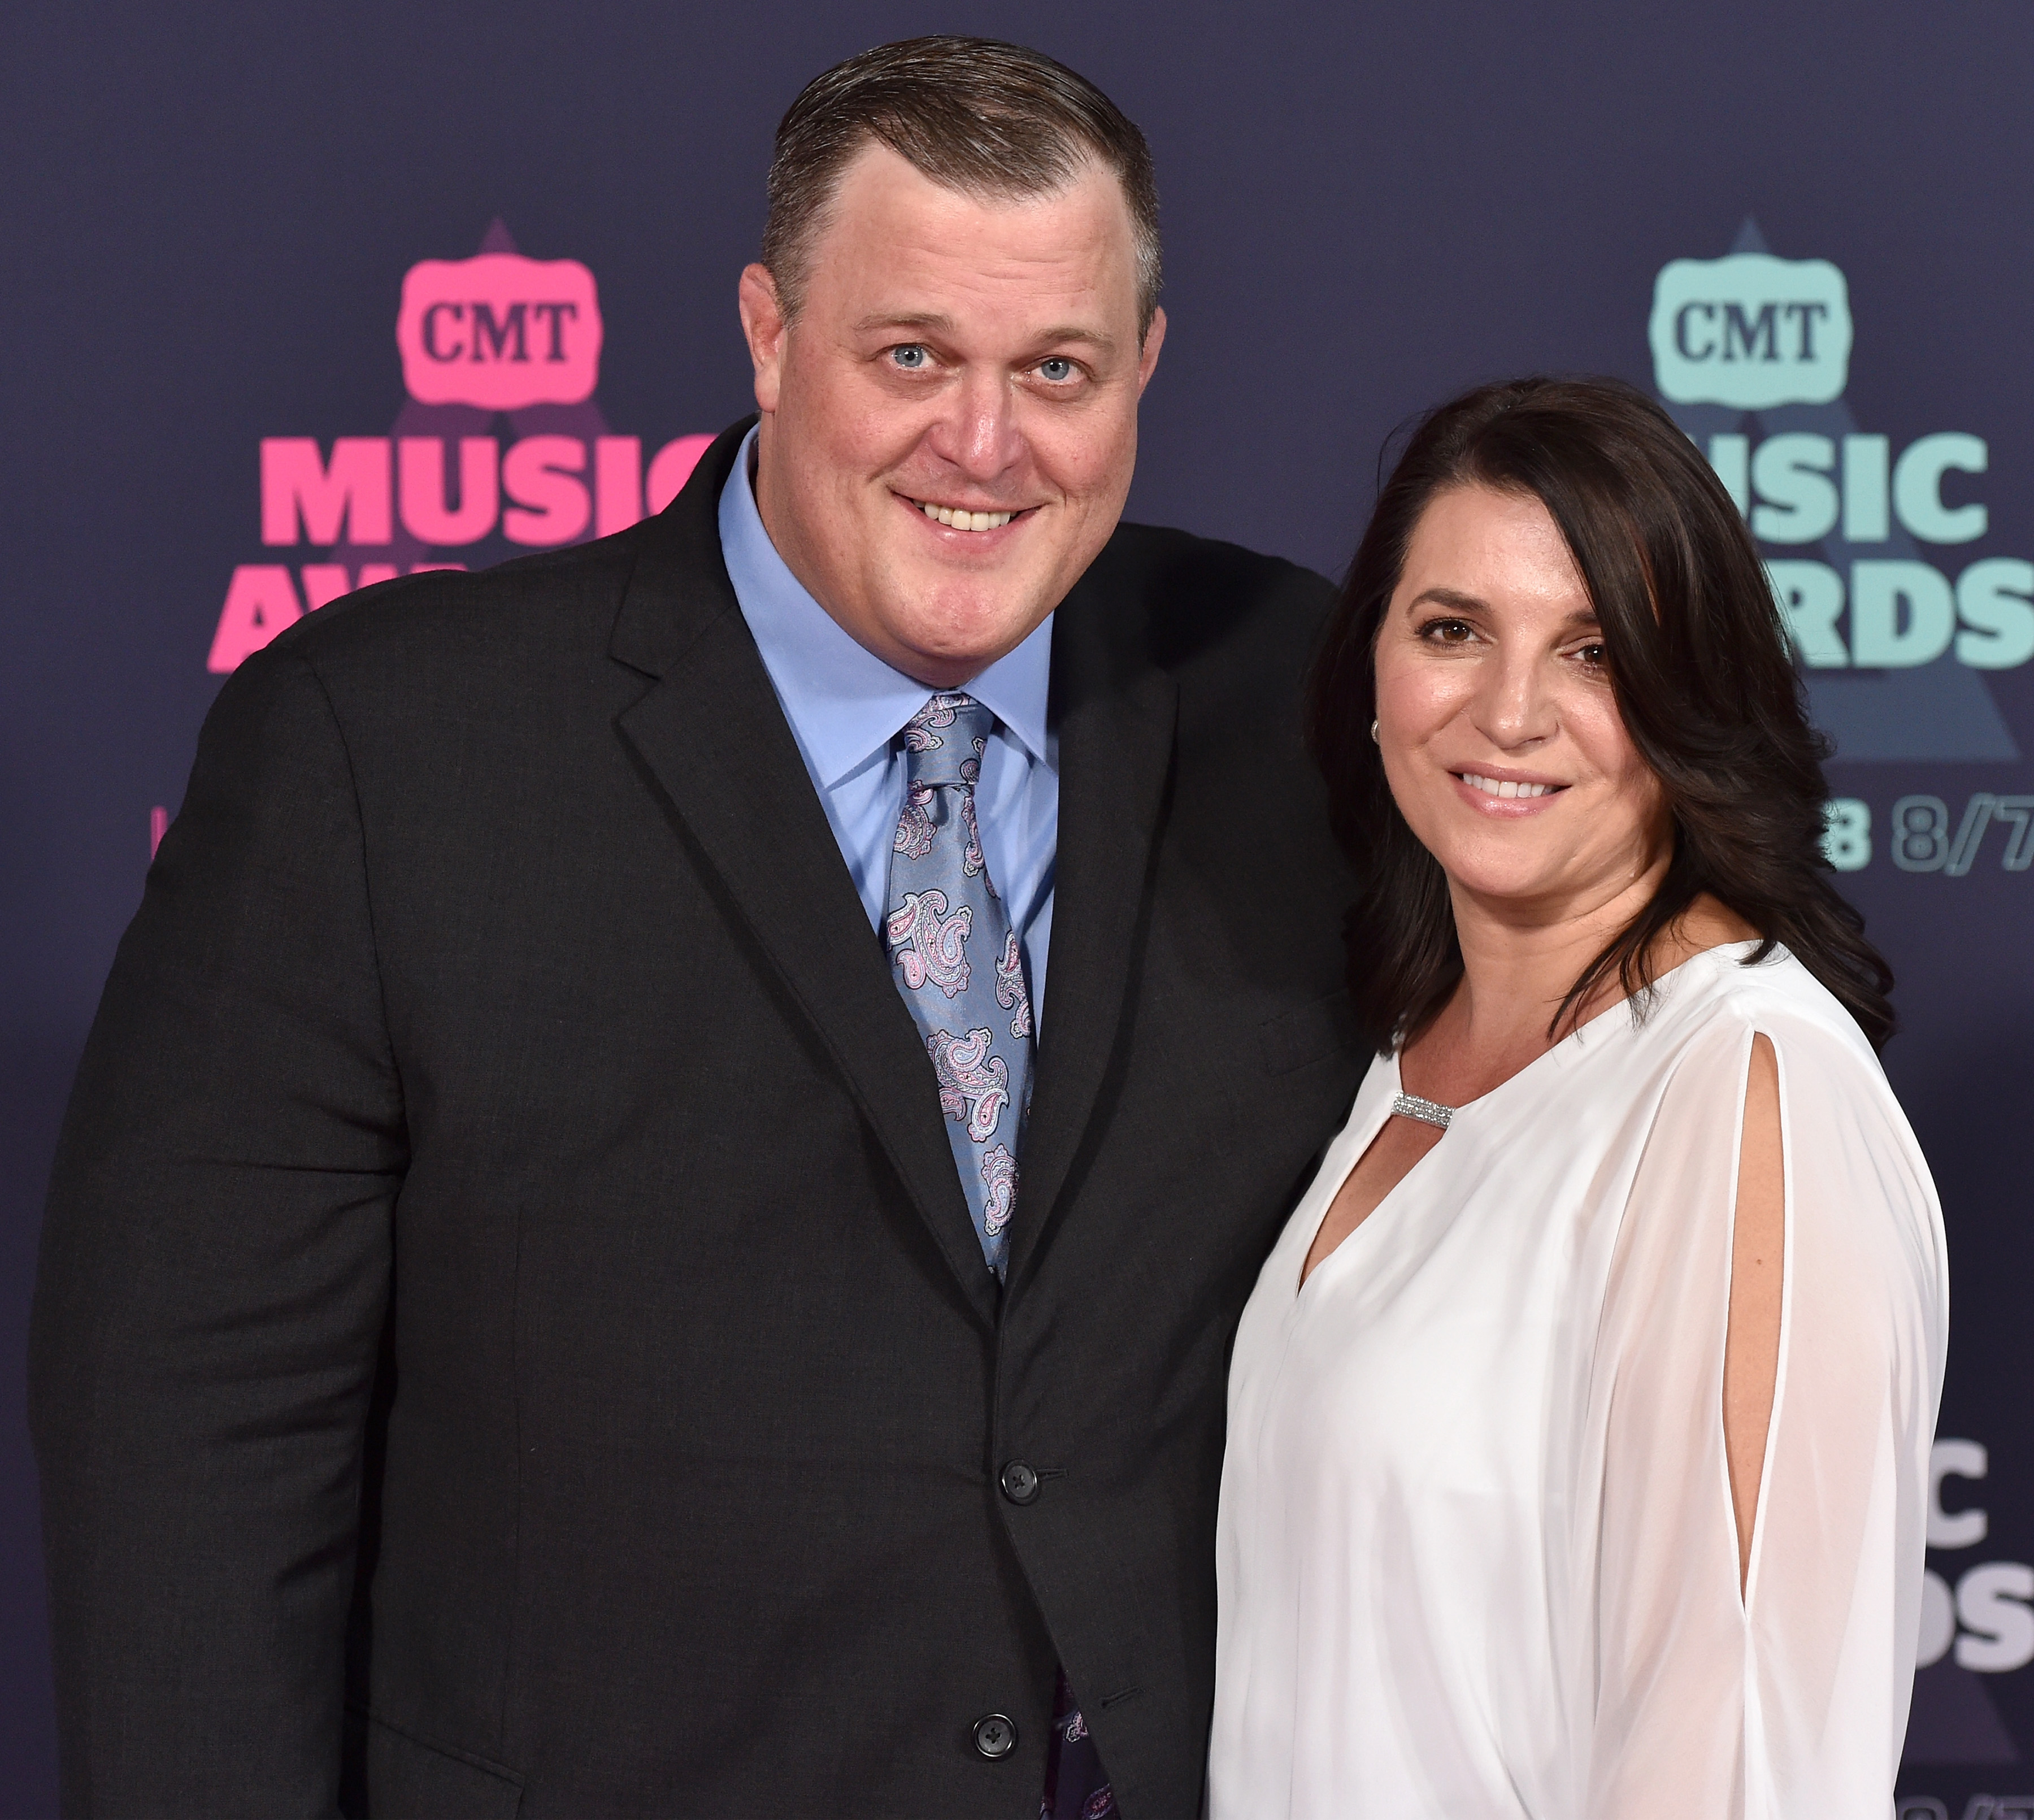 Actor Billy Gardell and Patty Gardell attend the 2016 CMT Music awards at the Bridgestone Arena on June 8, 2016, in Nashville, Tennessee. | Source: Getty Images